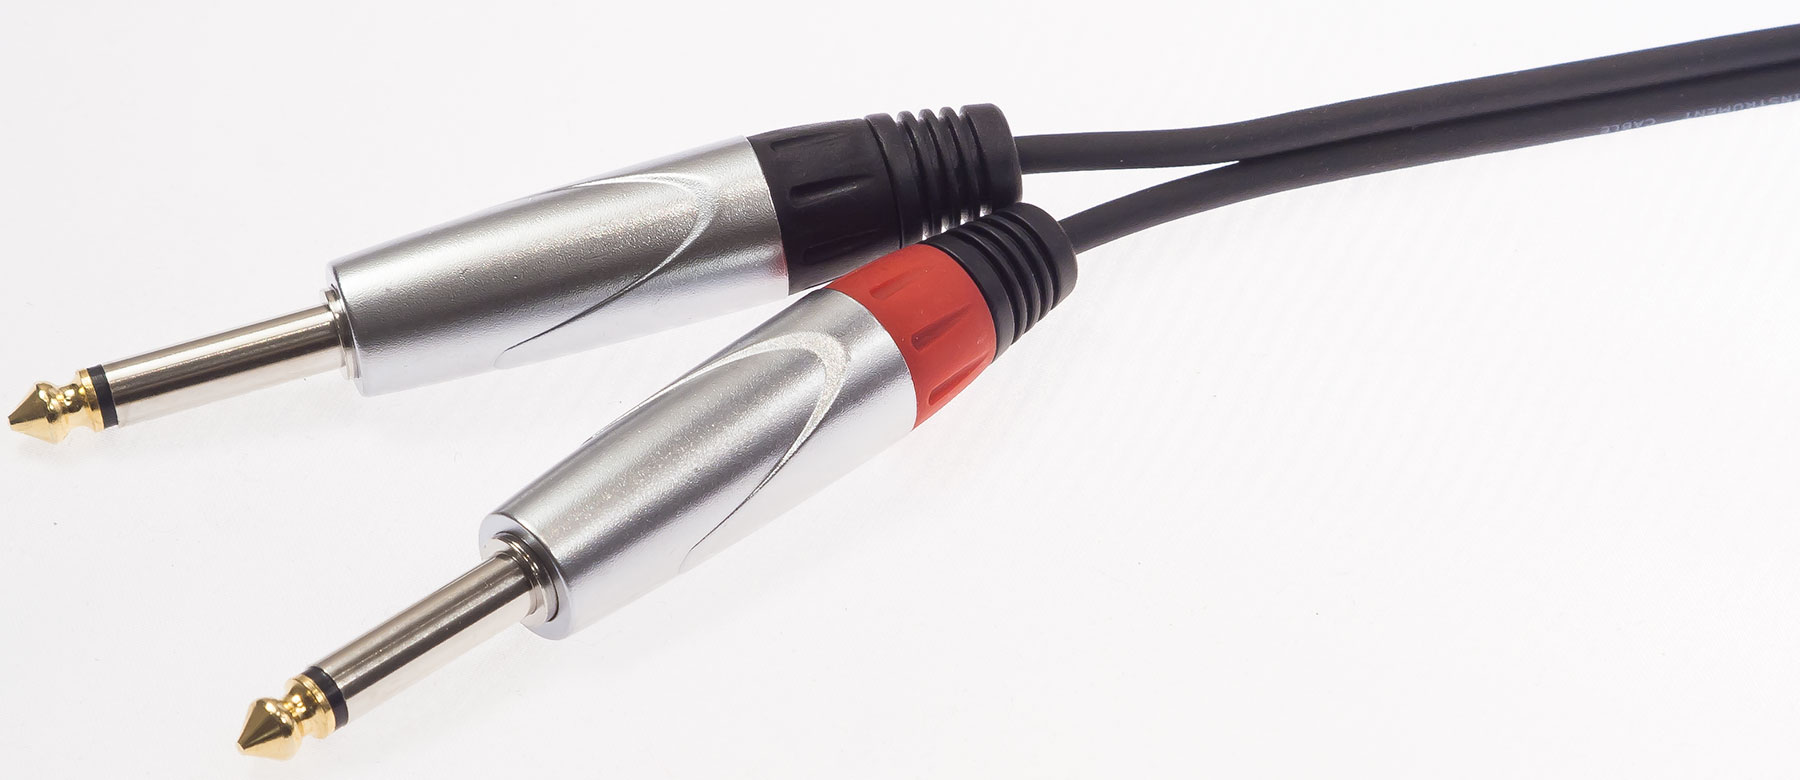 X-tone X2005-3m - Jack(m) 3,5 Stereo / 2 Jack(m) 6,35 Mono Silver Series - Cable - Variation 3